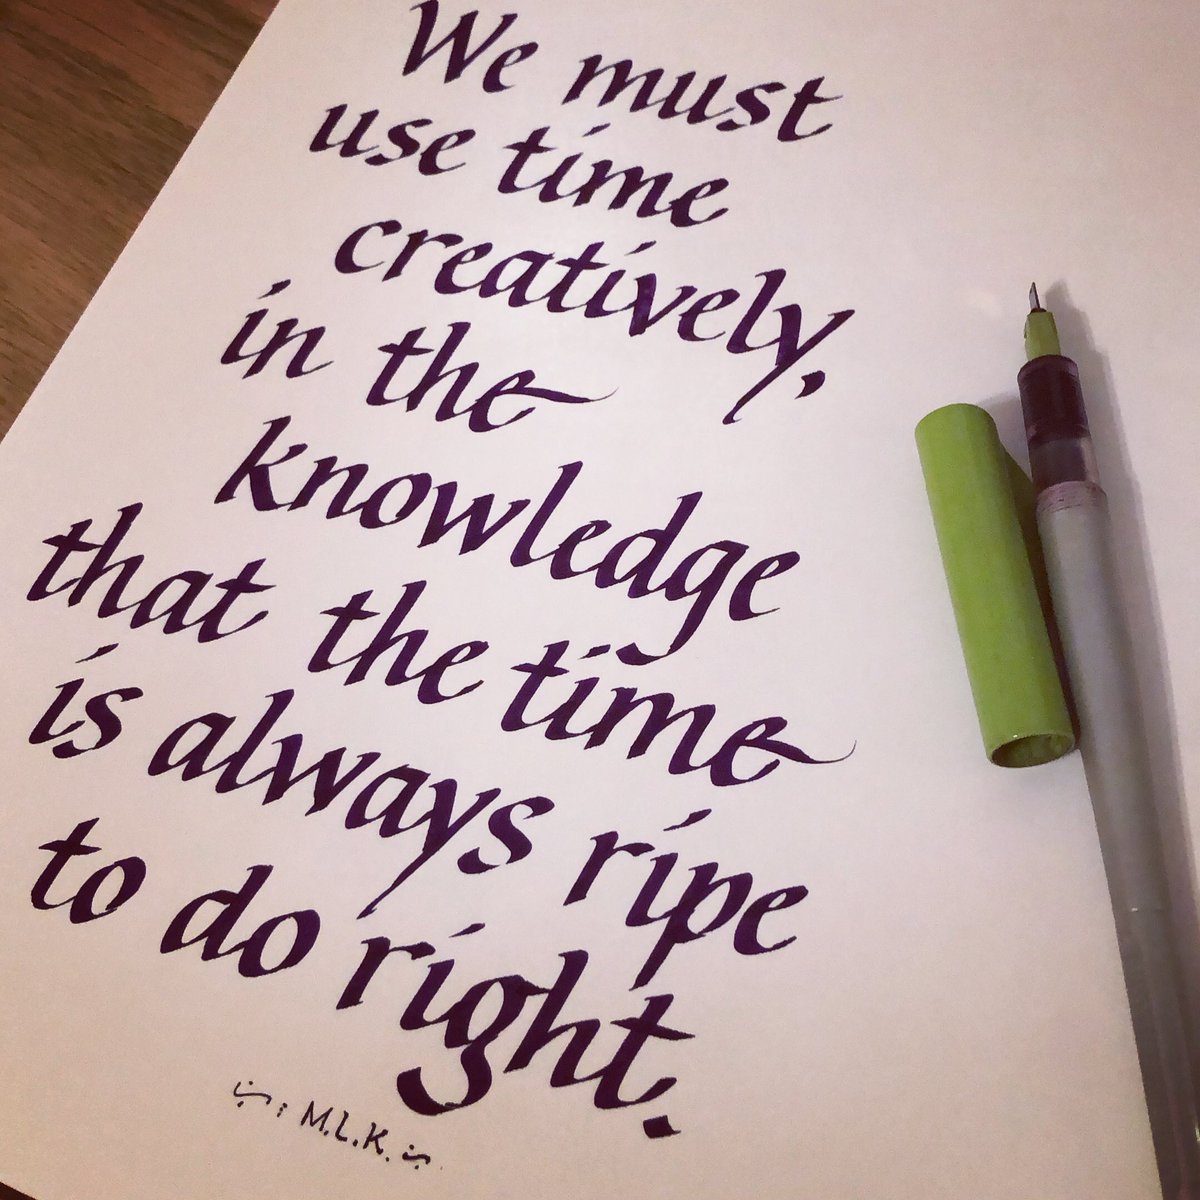 After working on a little project for a couple hours, I made time for this five-minute quickie. #parallelpen #calligraphy #MLKDay